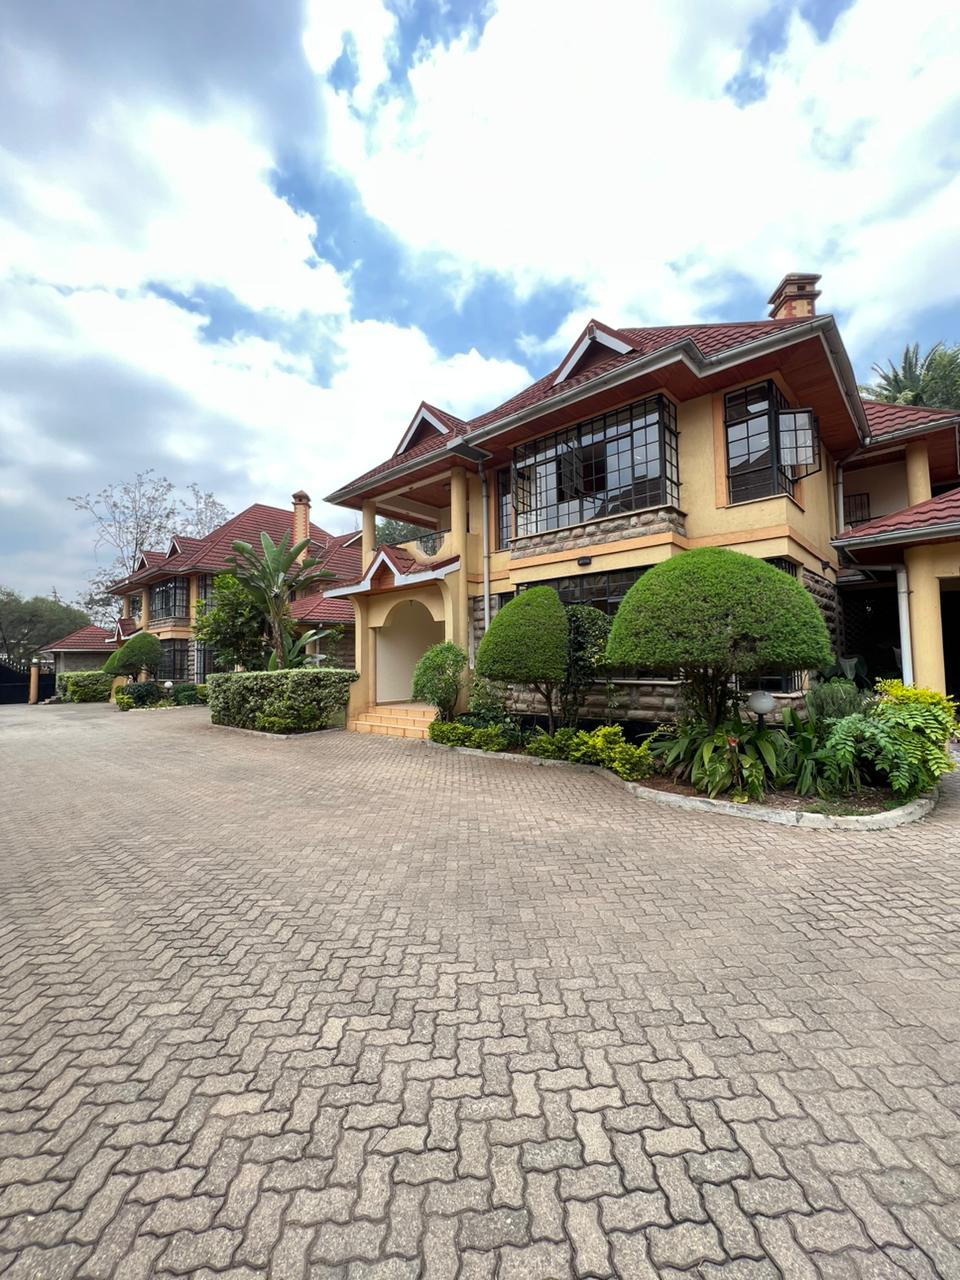 Pam Golding. Hass Consult. GTC. Eighty Eighty Nairobi. Musilli Spacious Modern 4 bedroom plus dsq townhouse to let in lavington, Nairobi. Gated community. Few units in the compound. Rent per month 250K Musilli Homes Homes